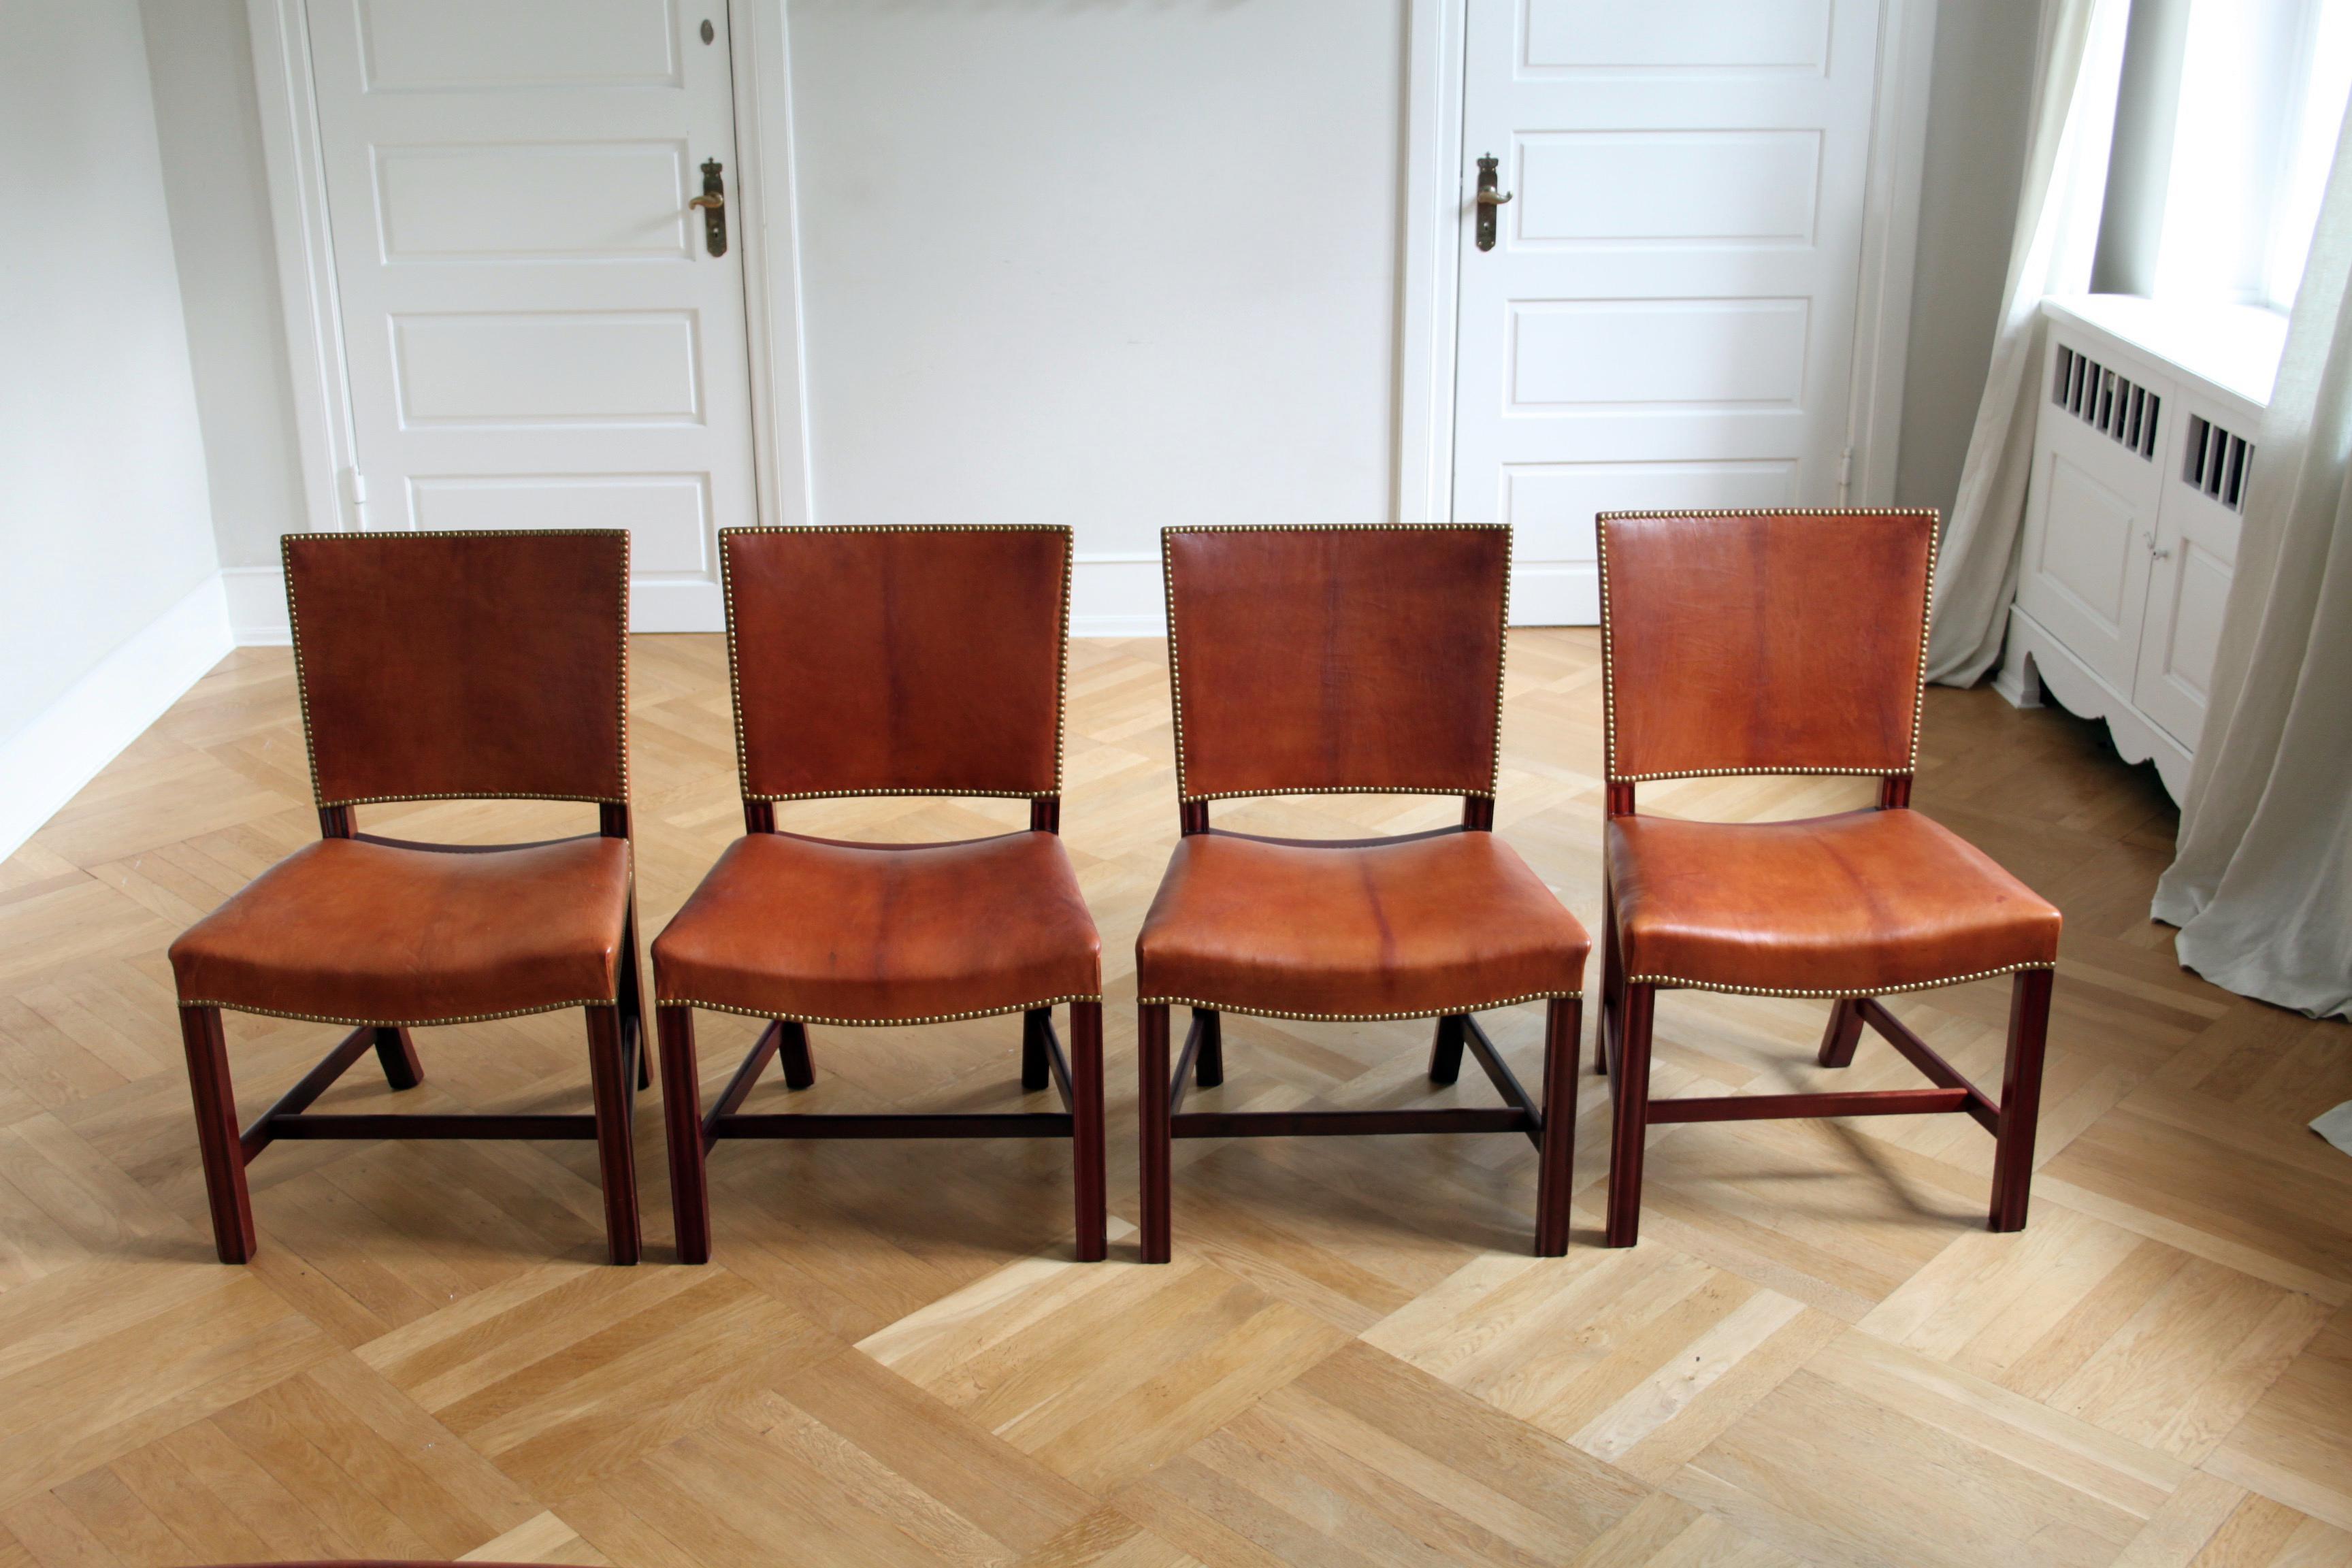 Oiled Set of 12 Kaare Klint Red Chairs, Niger Leather, Mahogany